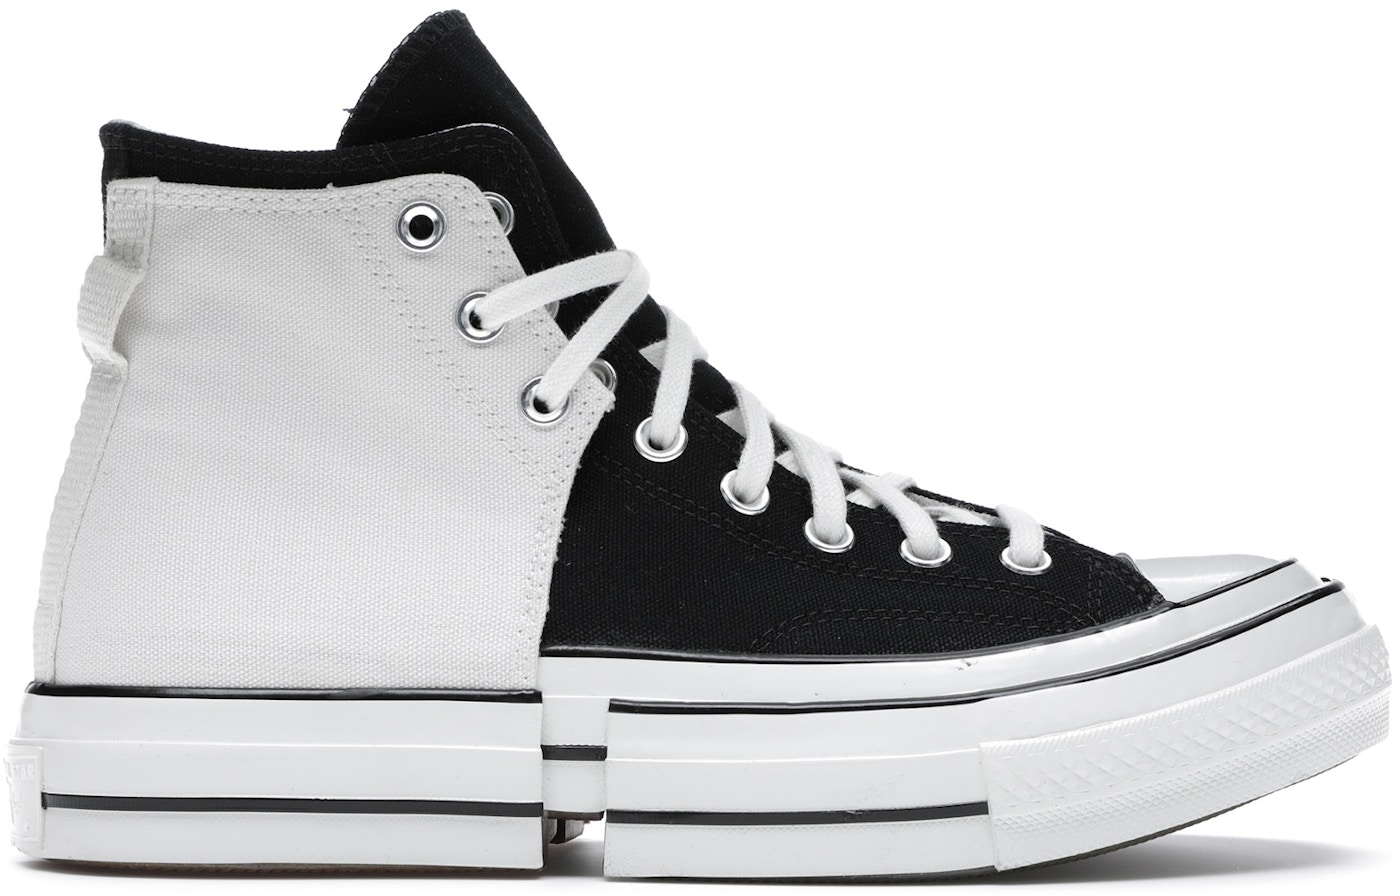 Converse Chuck Taylor All-Star 70 Feng Chen Wang 2-in-1 Ivory Black - 169839C